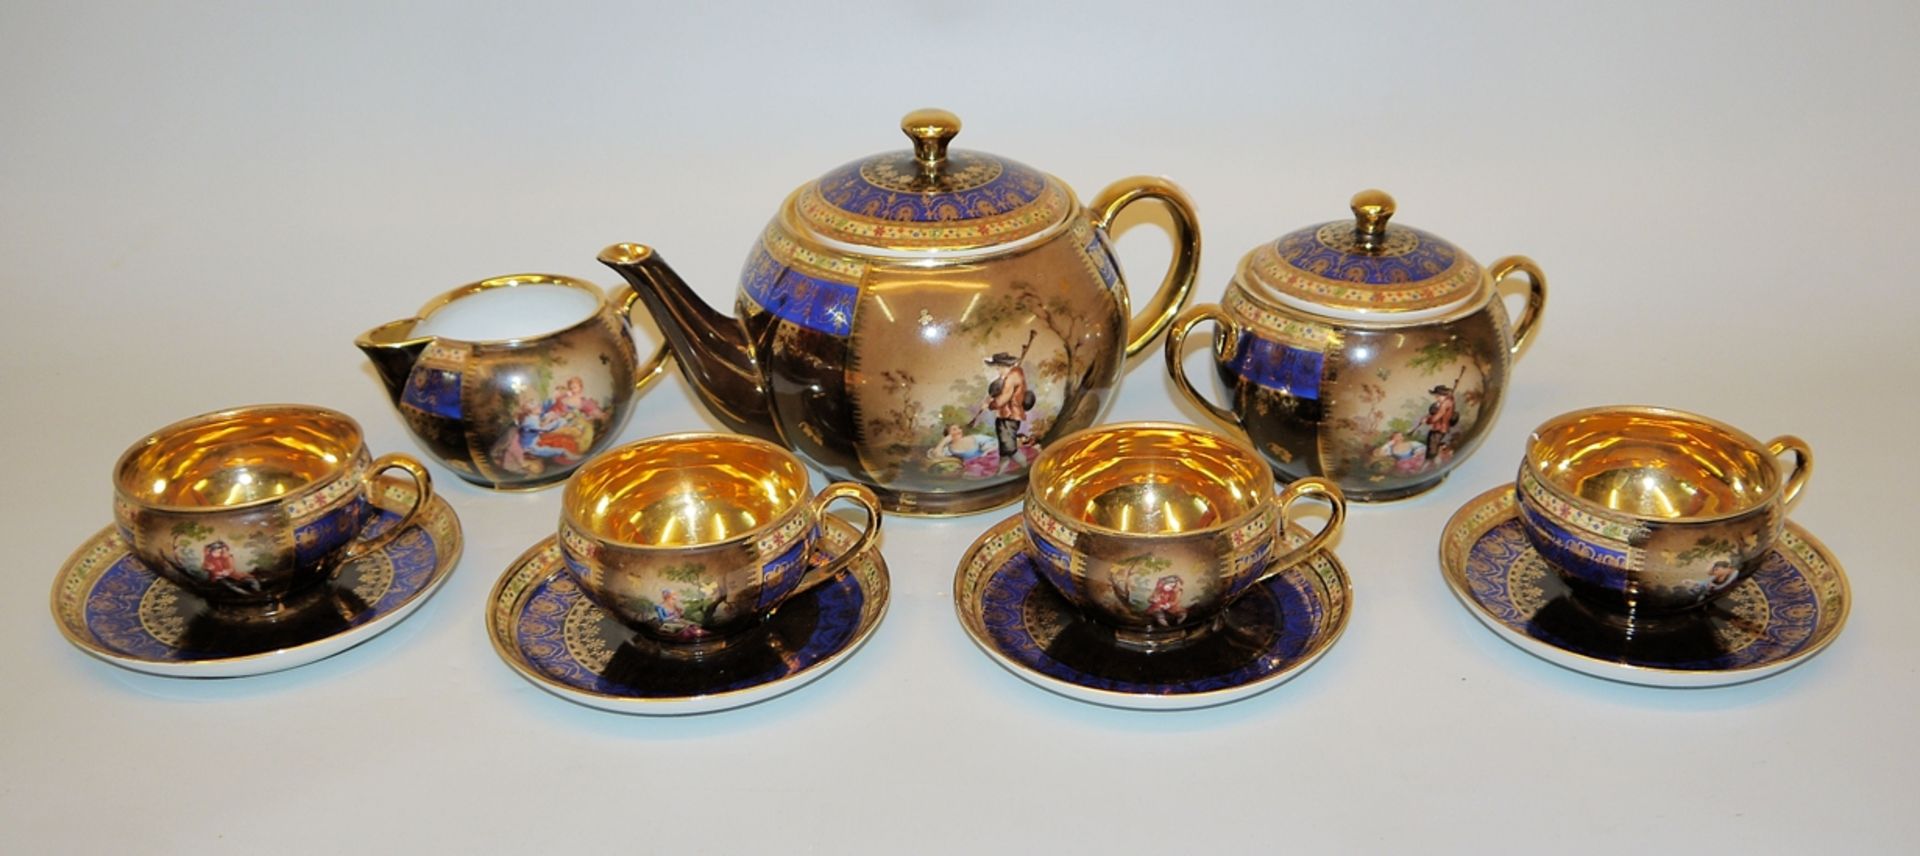 Tea service in the Old Viennese style, Volkstedt-Rudolstadt, early 20th century